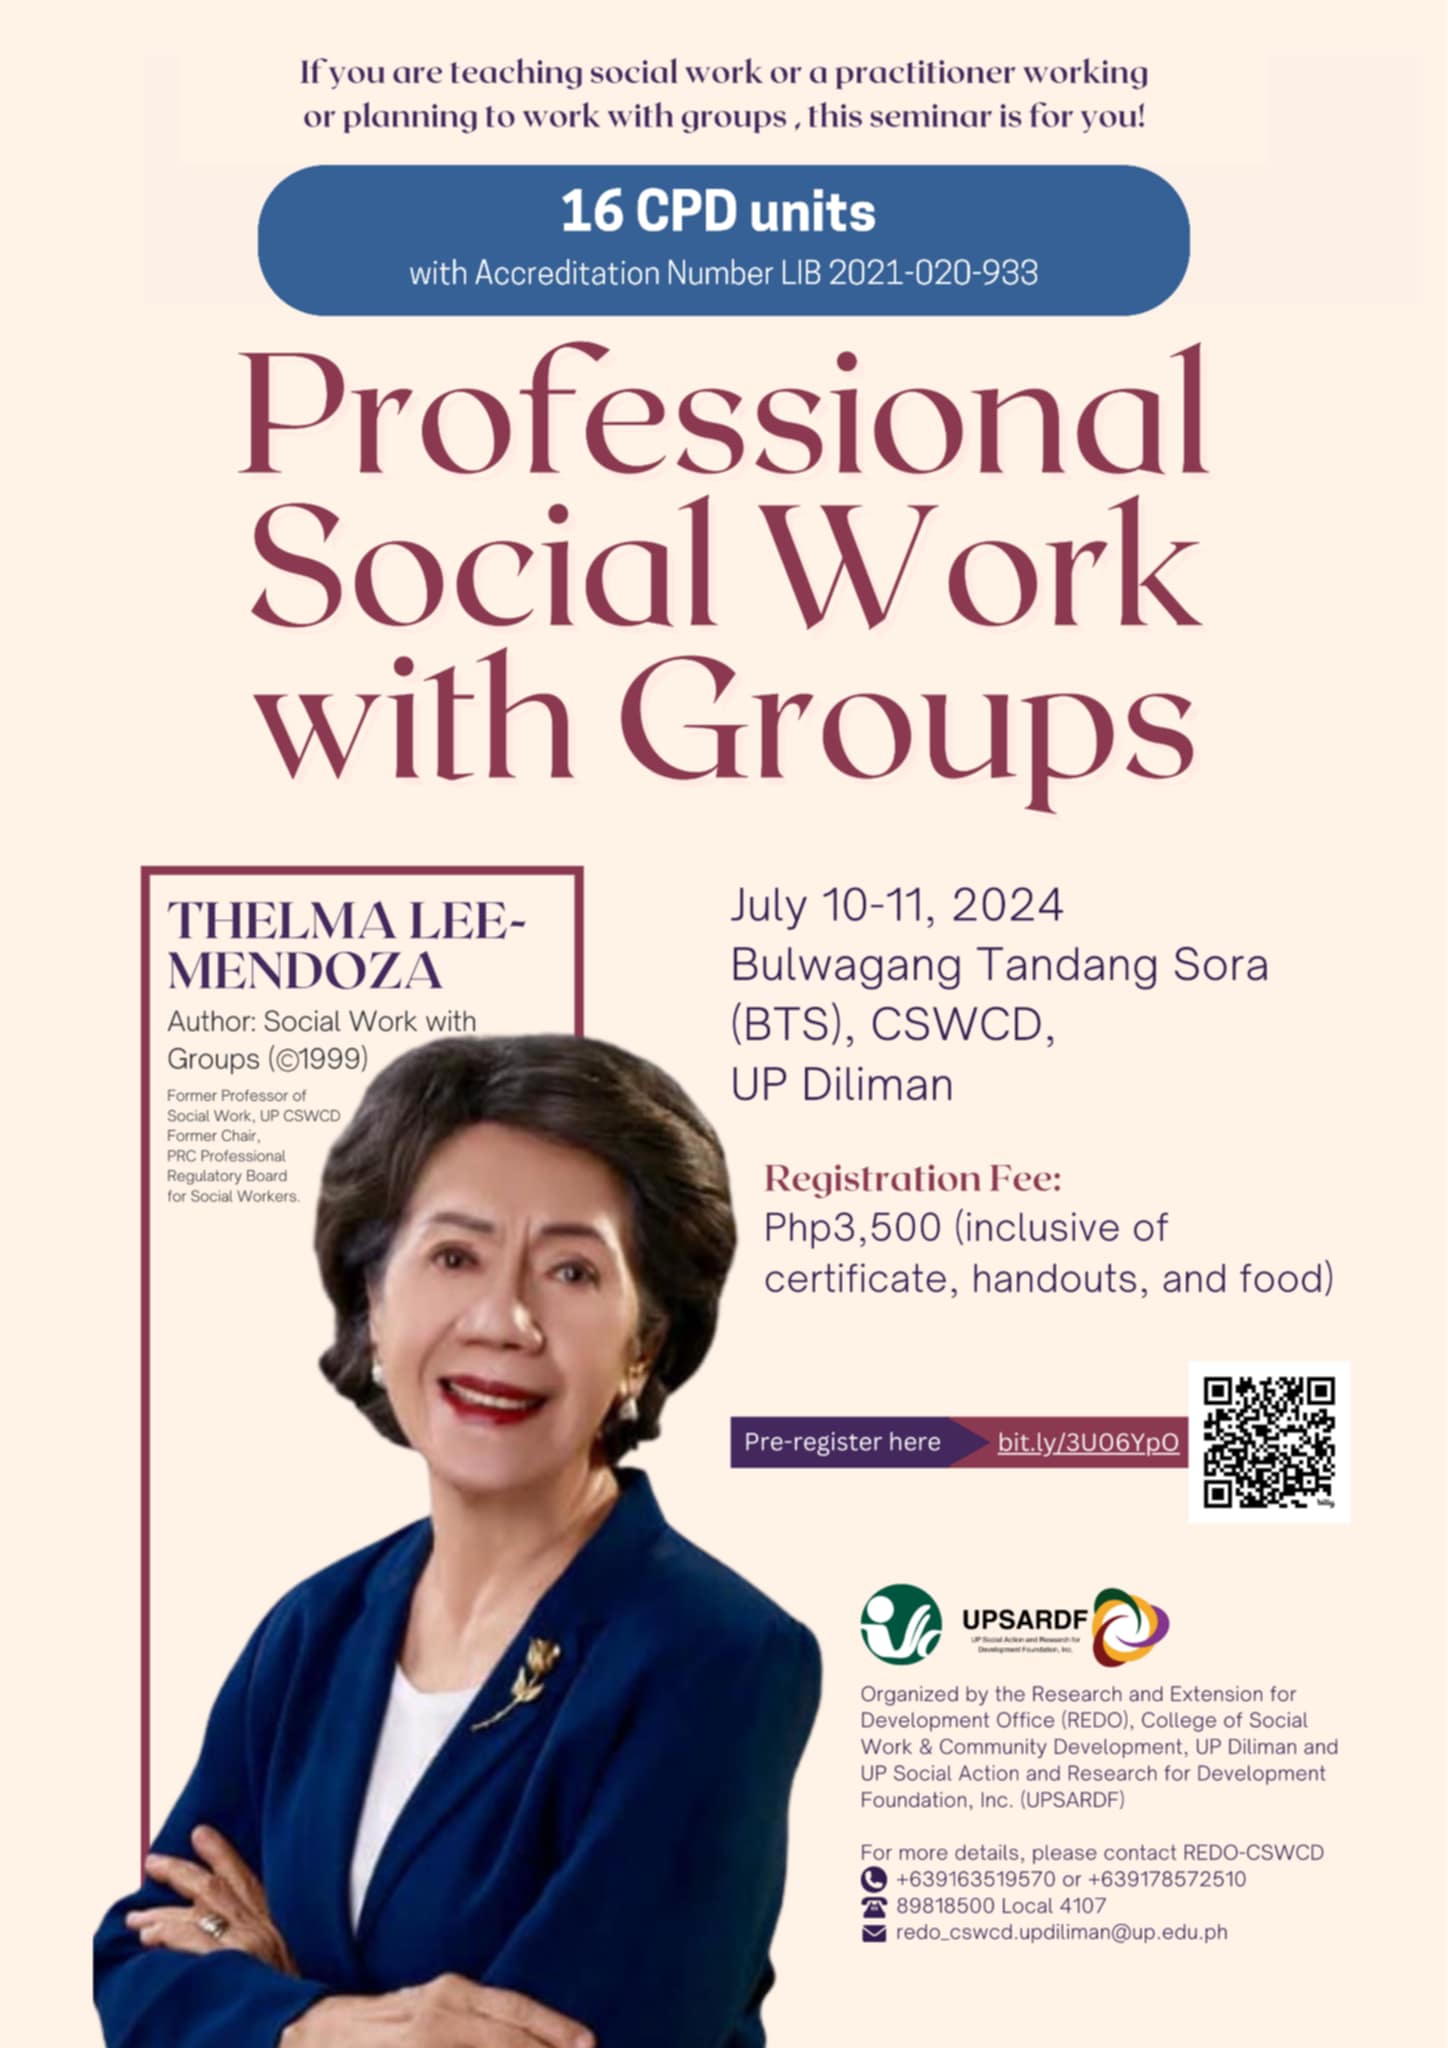 Seminar on Professional Social Work with Groups